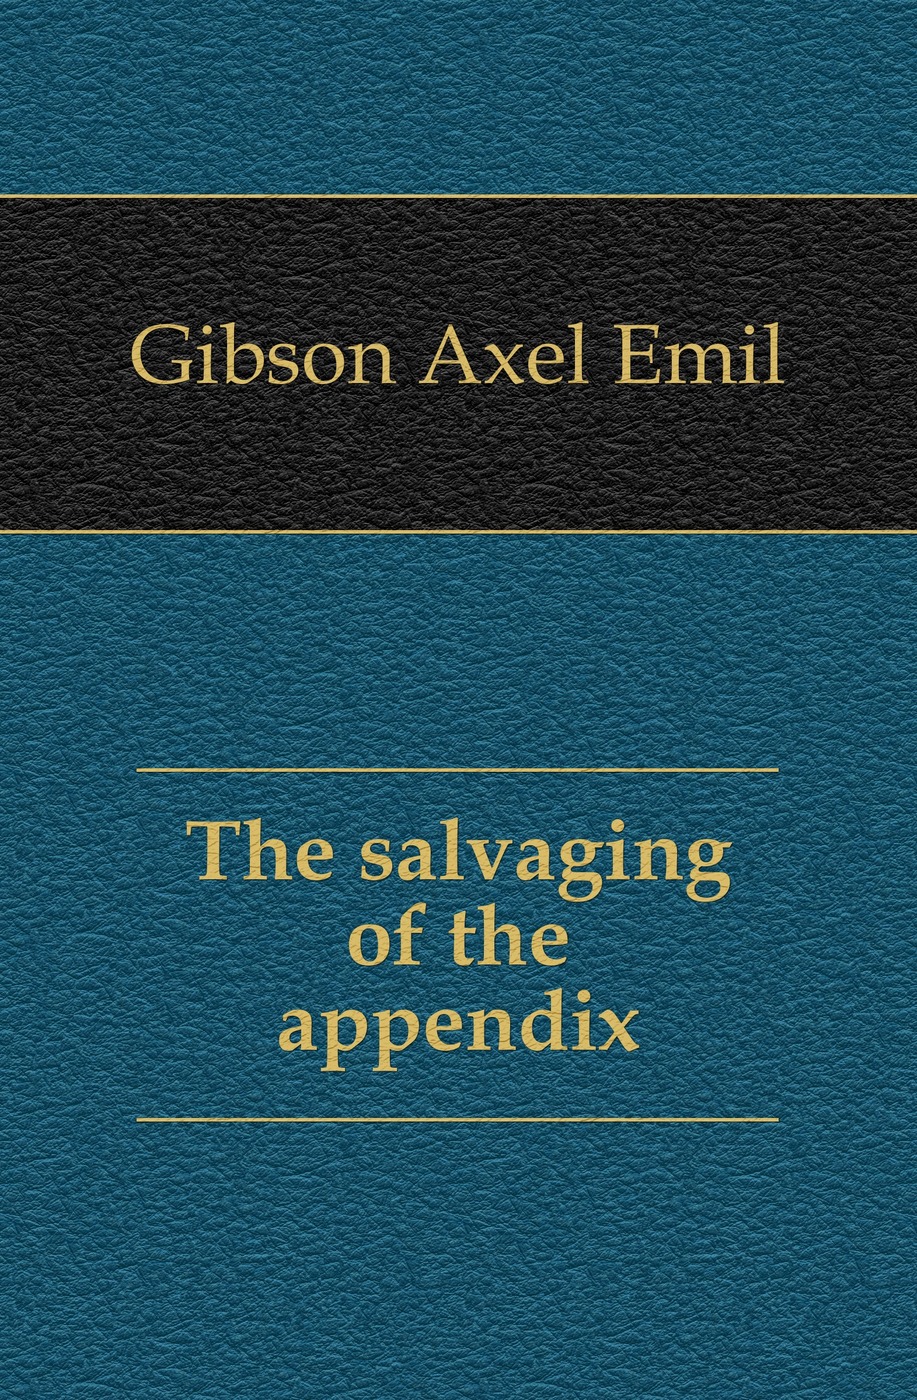 The salvaging of the appendix